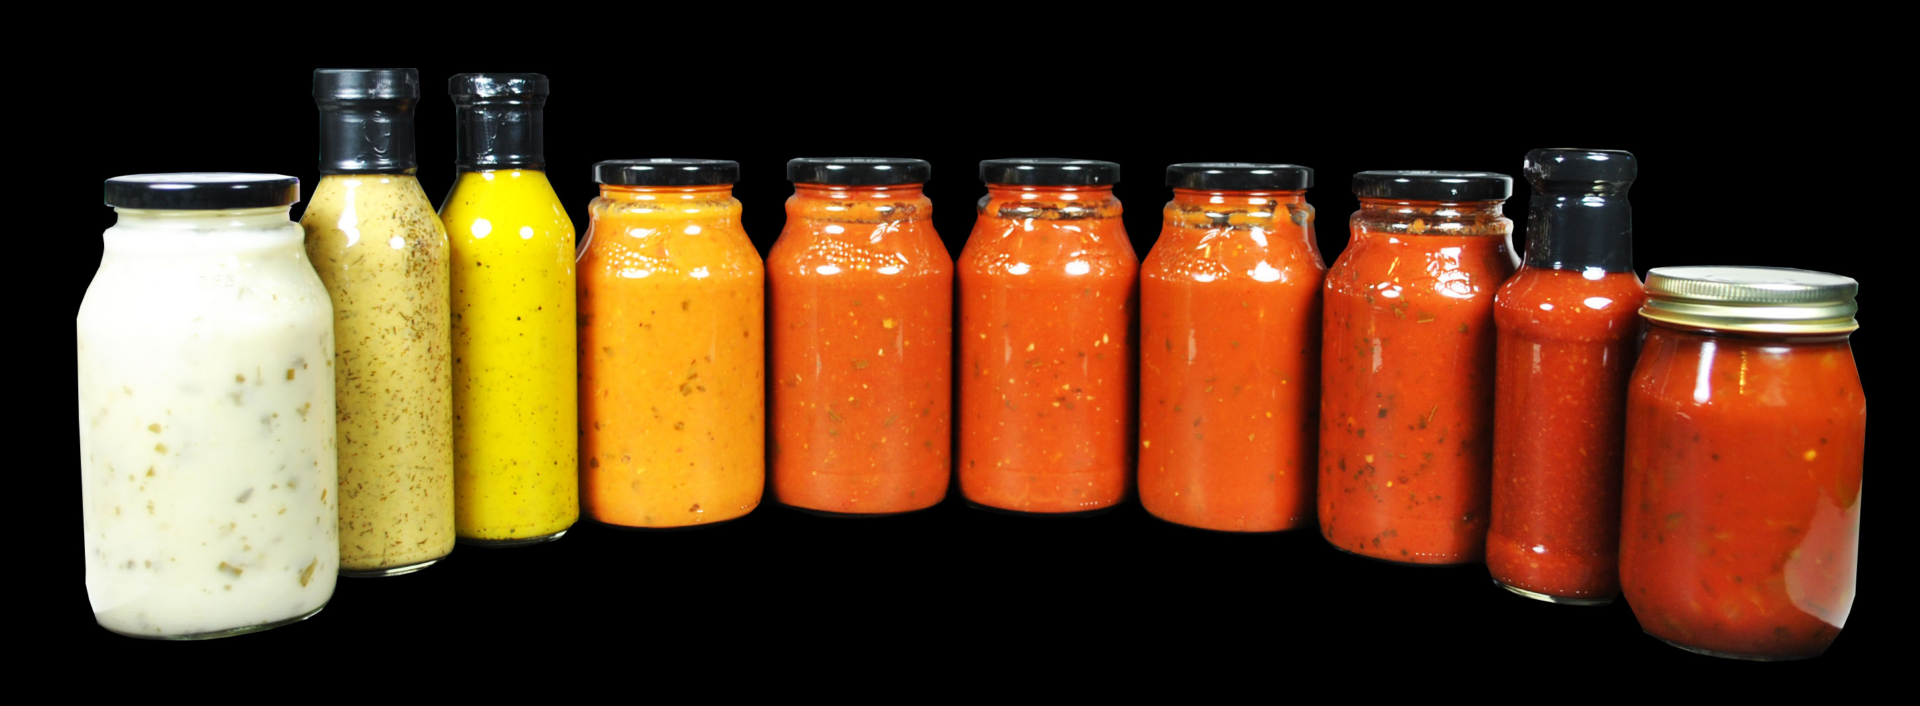 Four jars of different sauces are lined up.